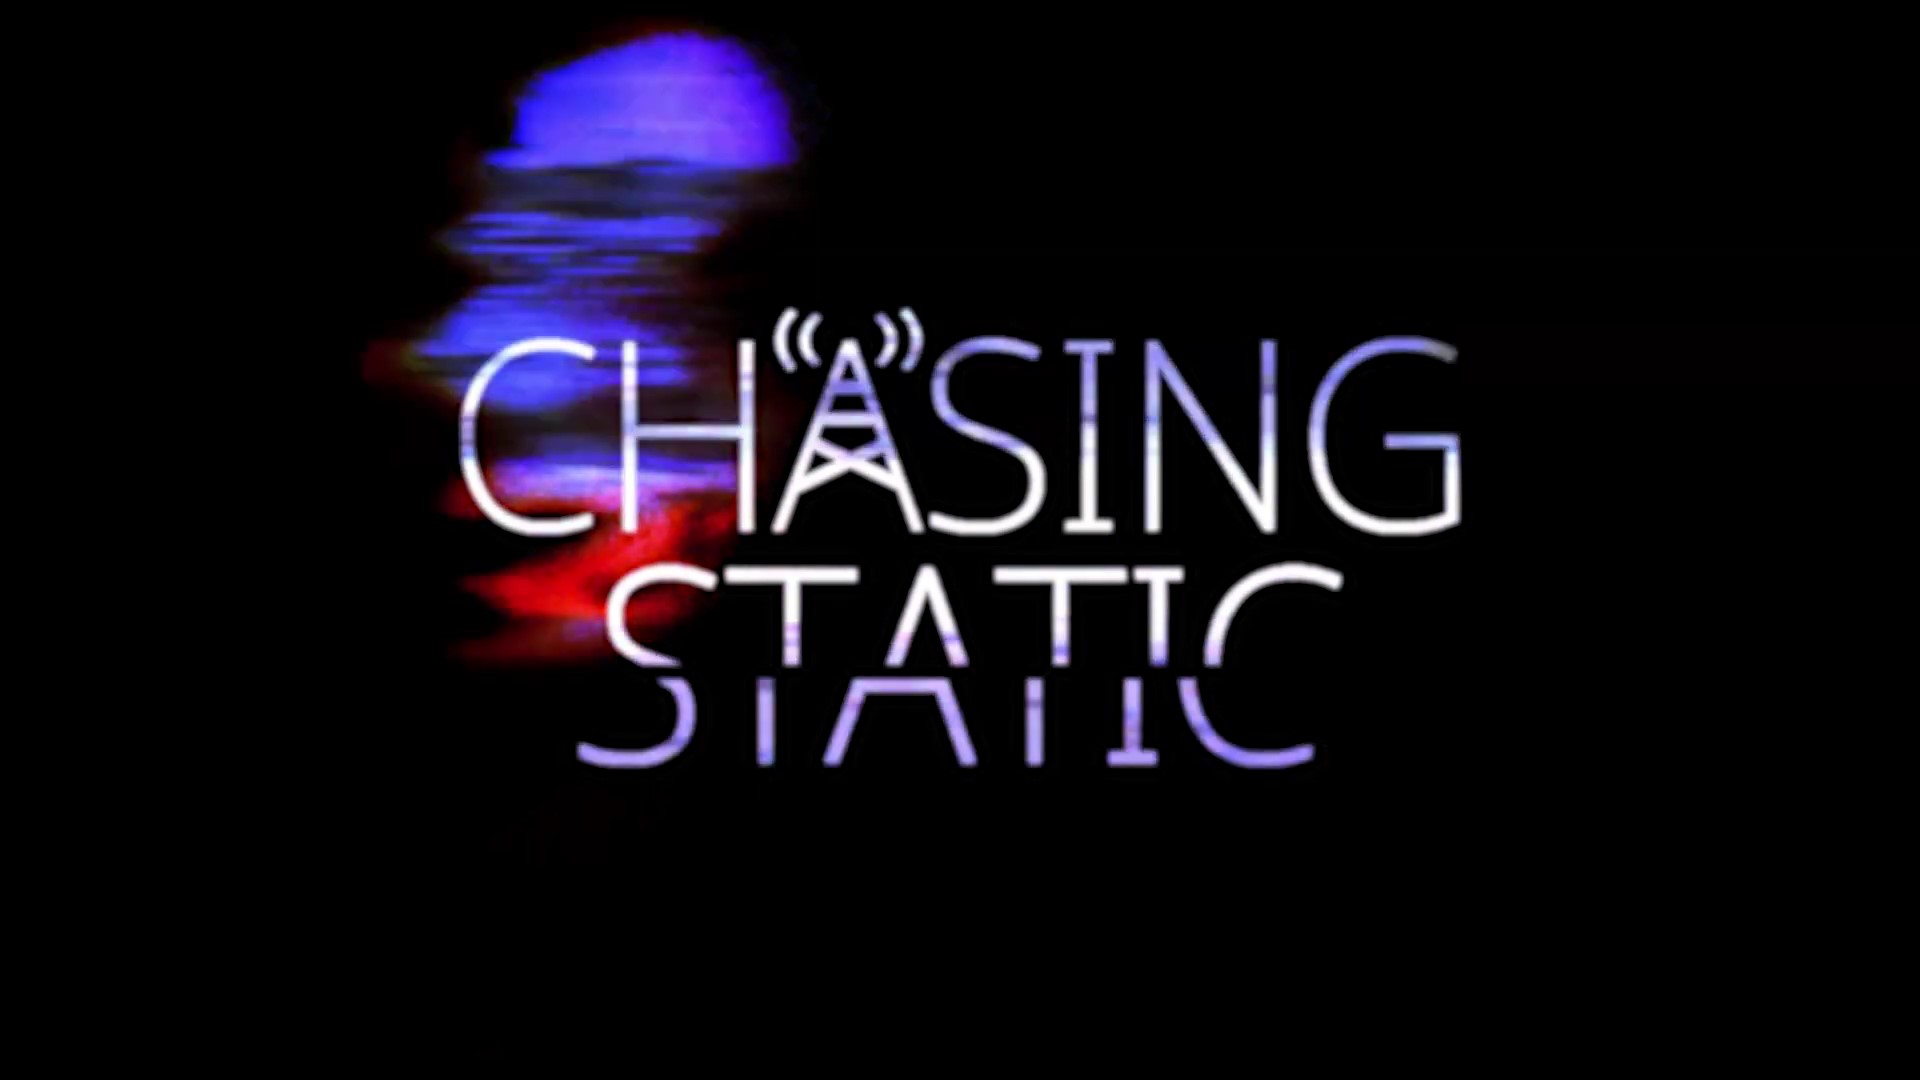 The Chasing Static remaster is presented in a new trailer